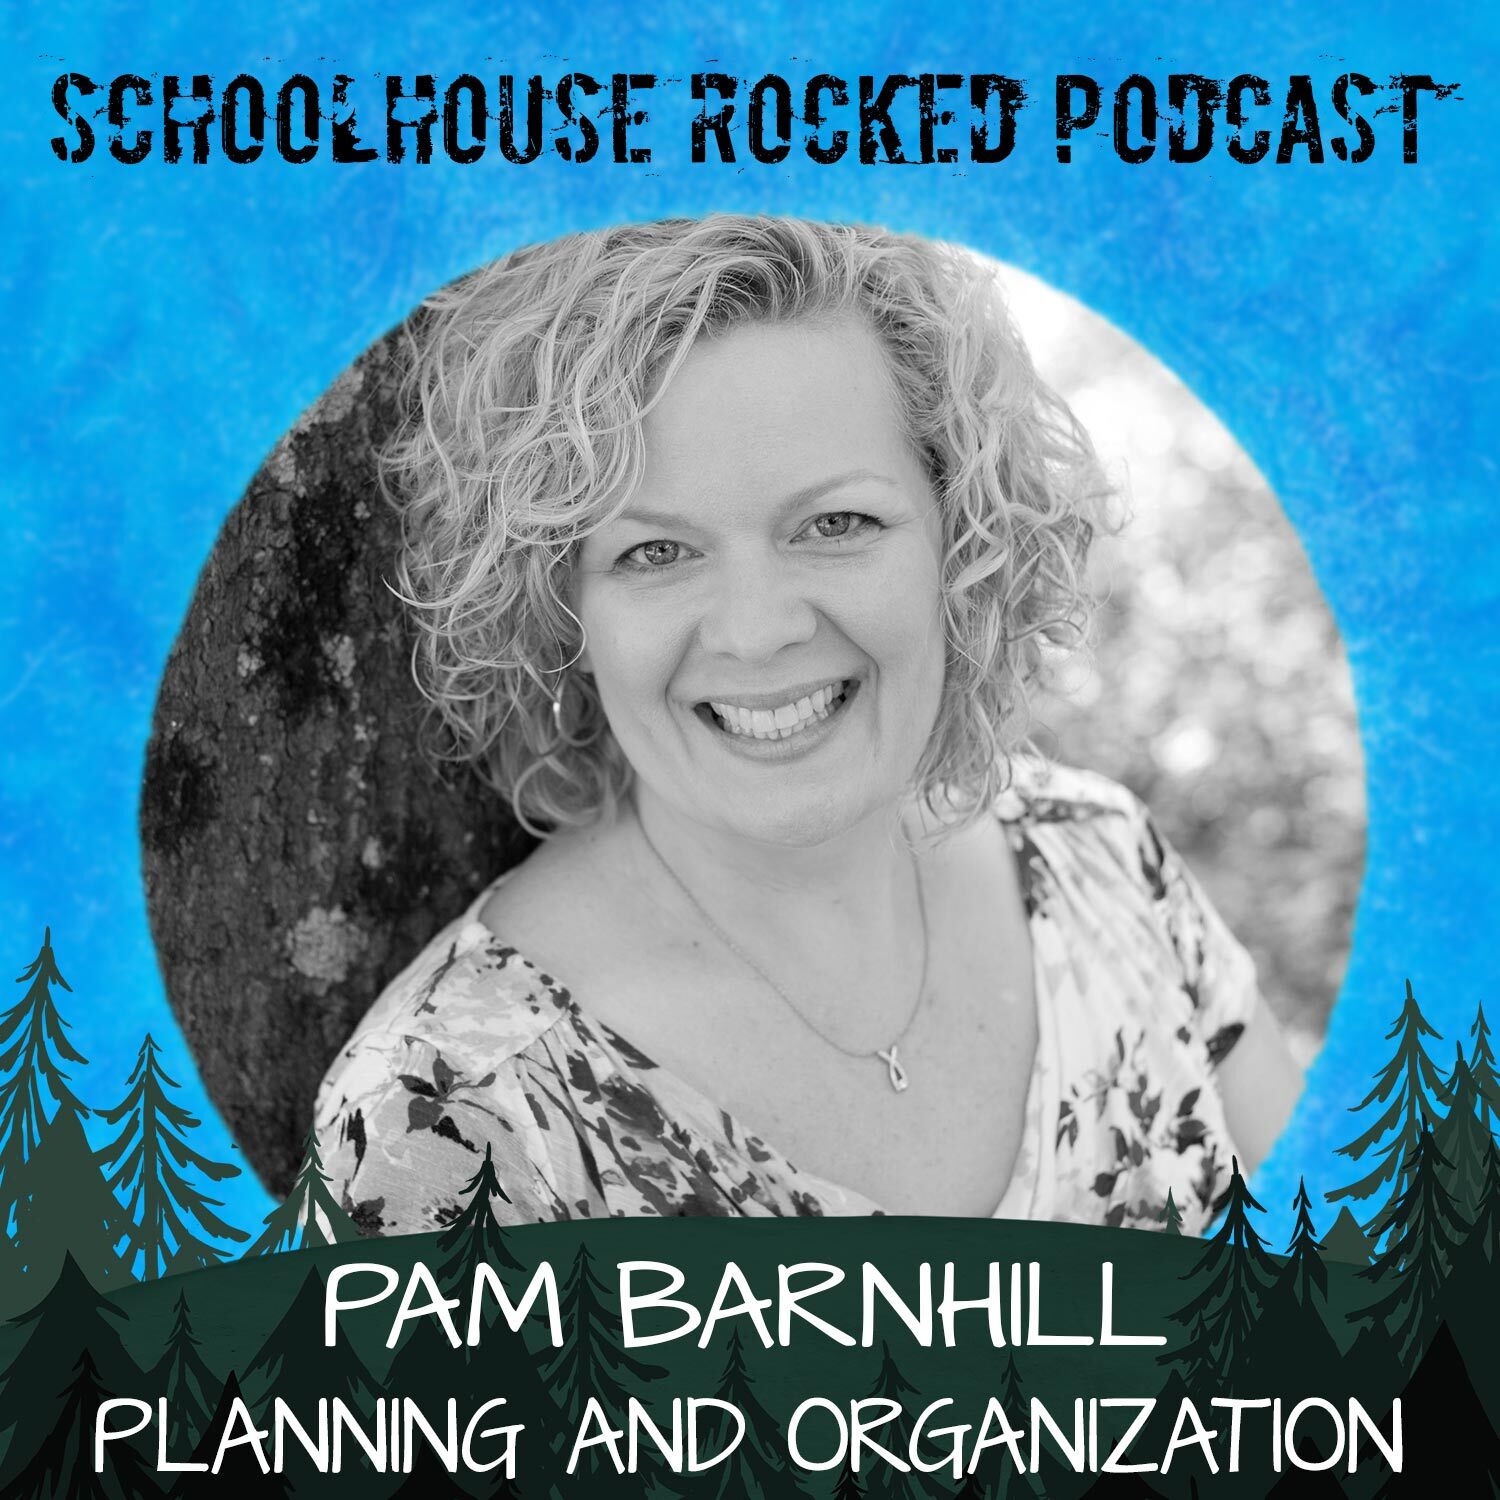 Pam Barnhill - How to organize your homeschool